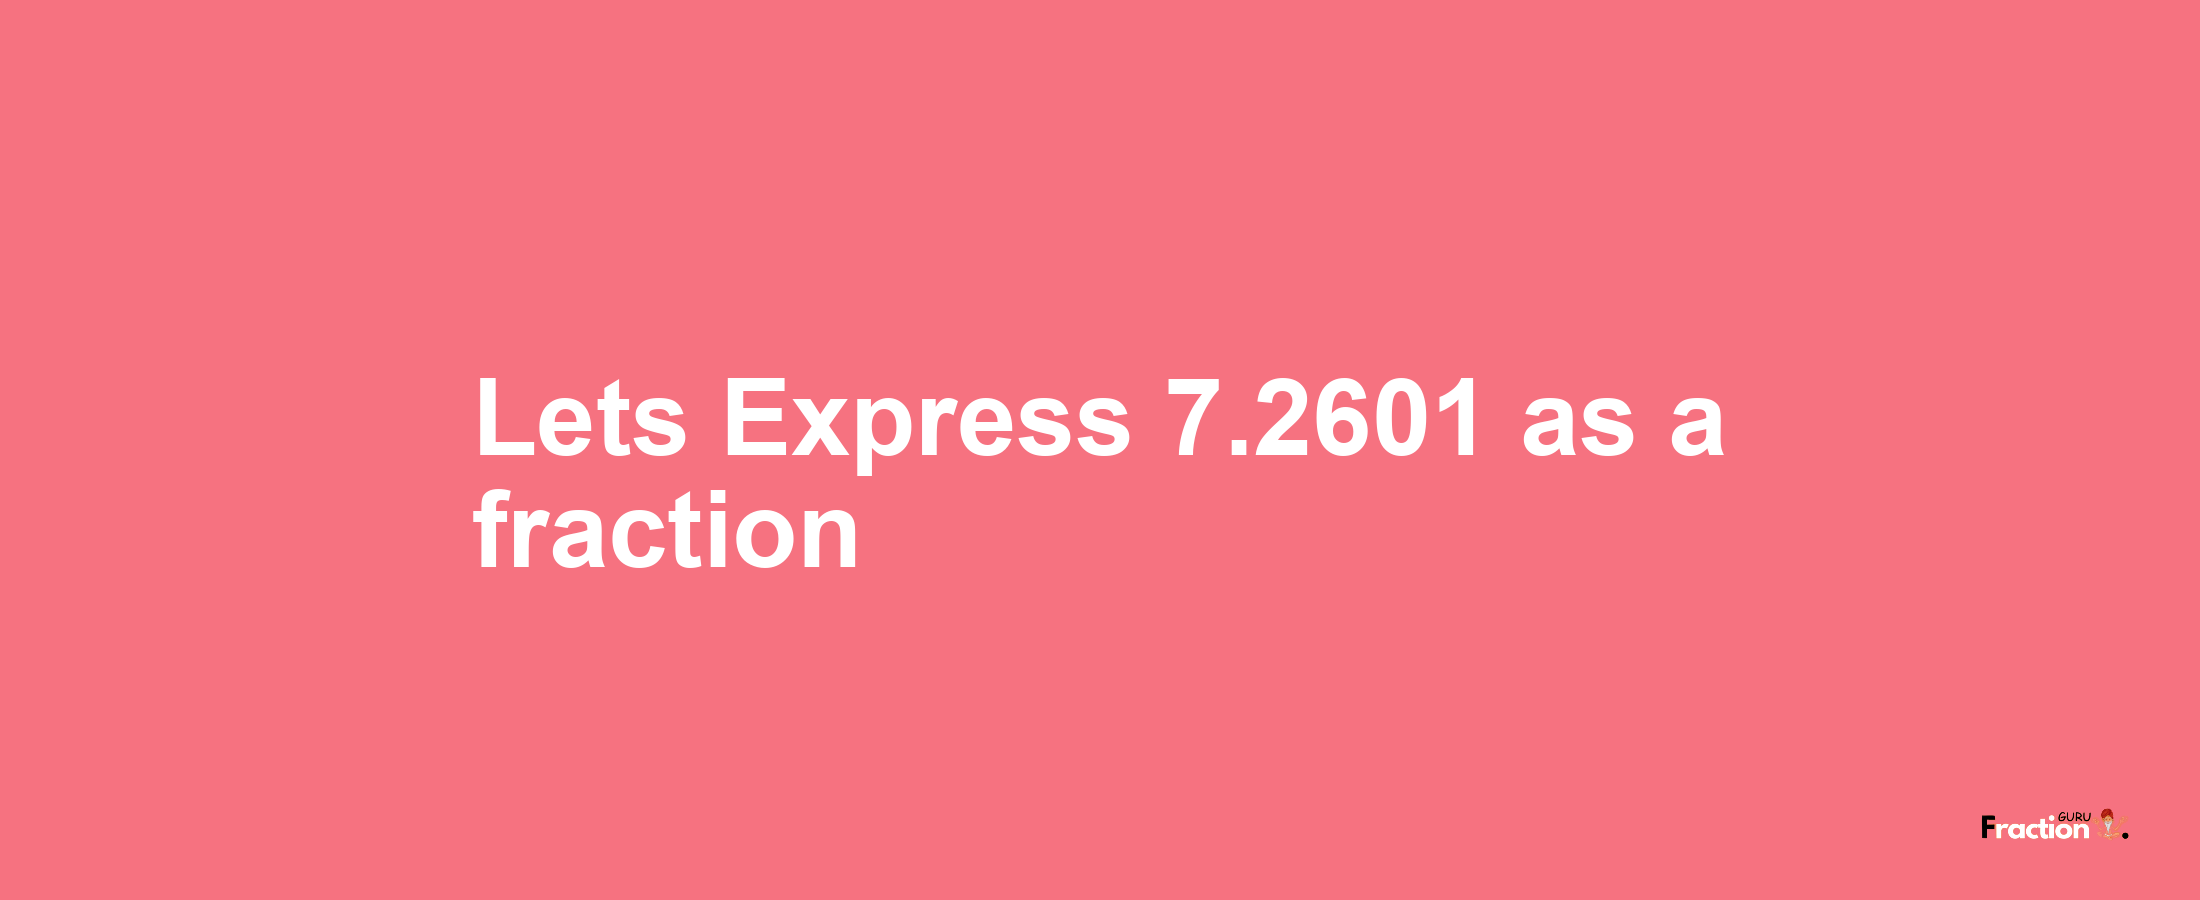 Lets Express 7.2601 as afraction